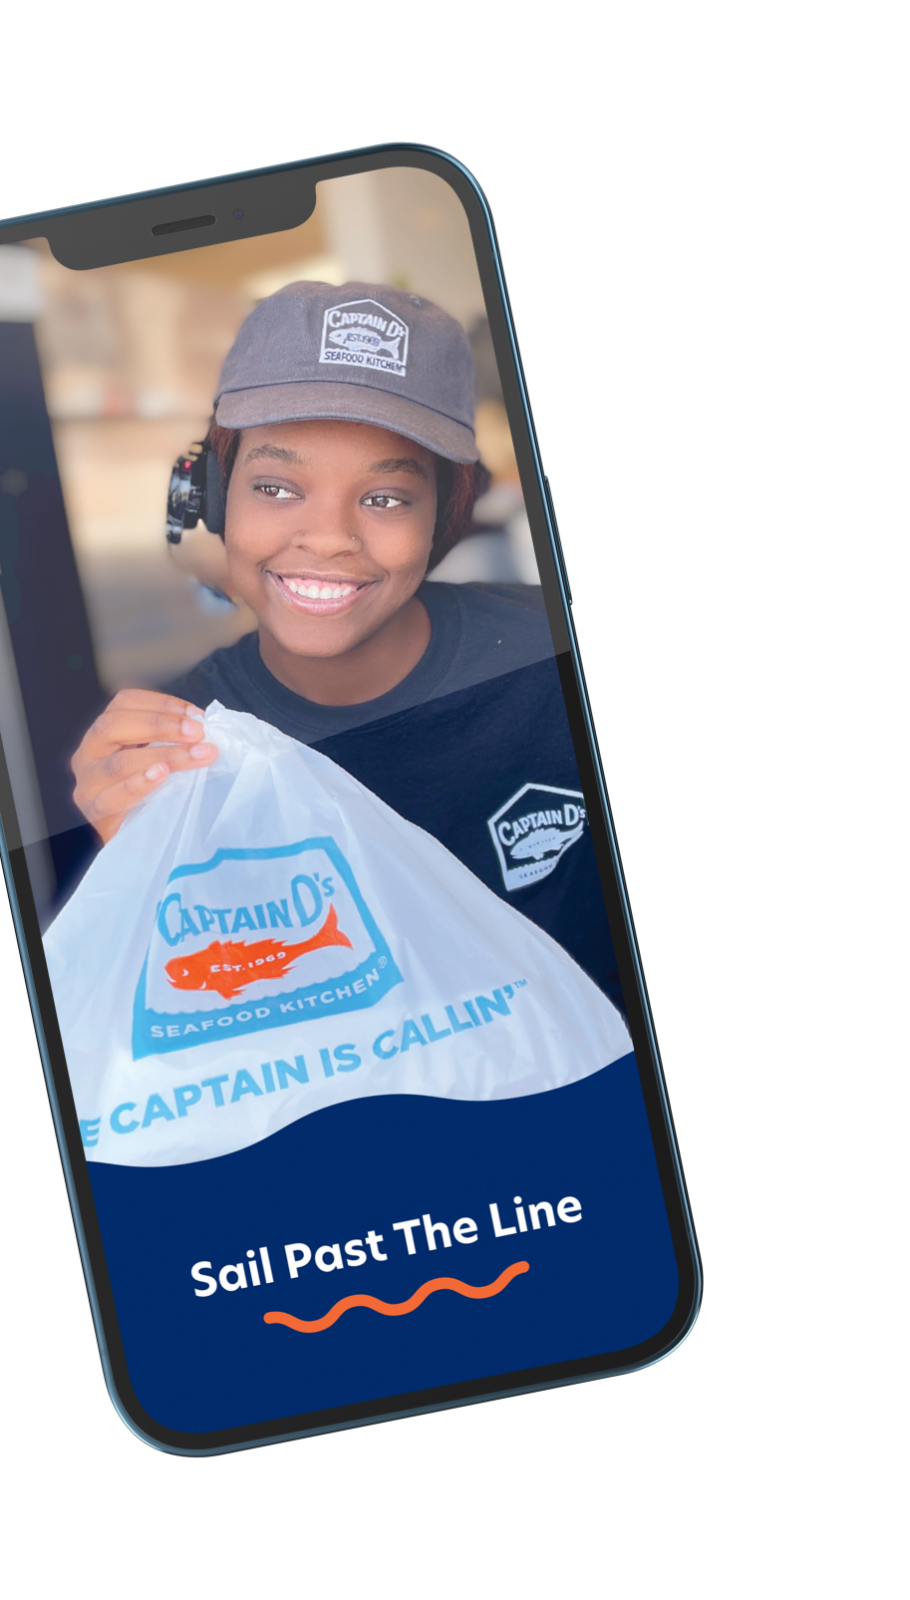 Phone showing the Captain D's app with an image of a drive thru worker handing a bag of food to a customer (offscreen).